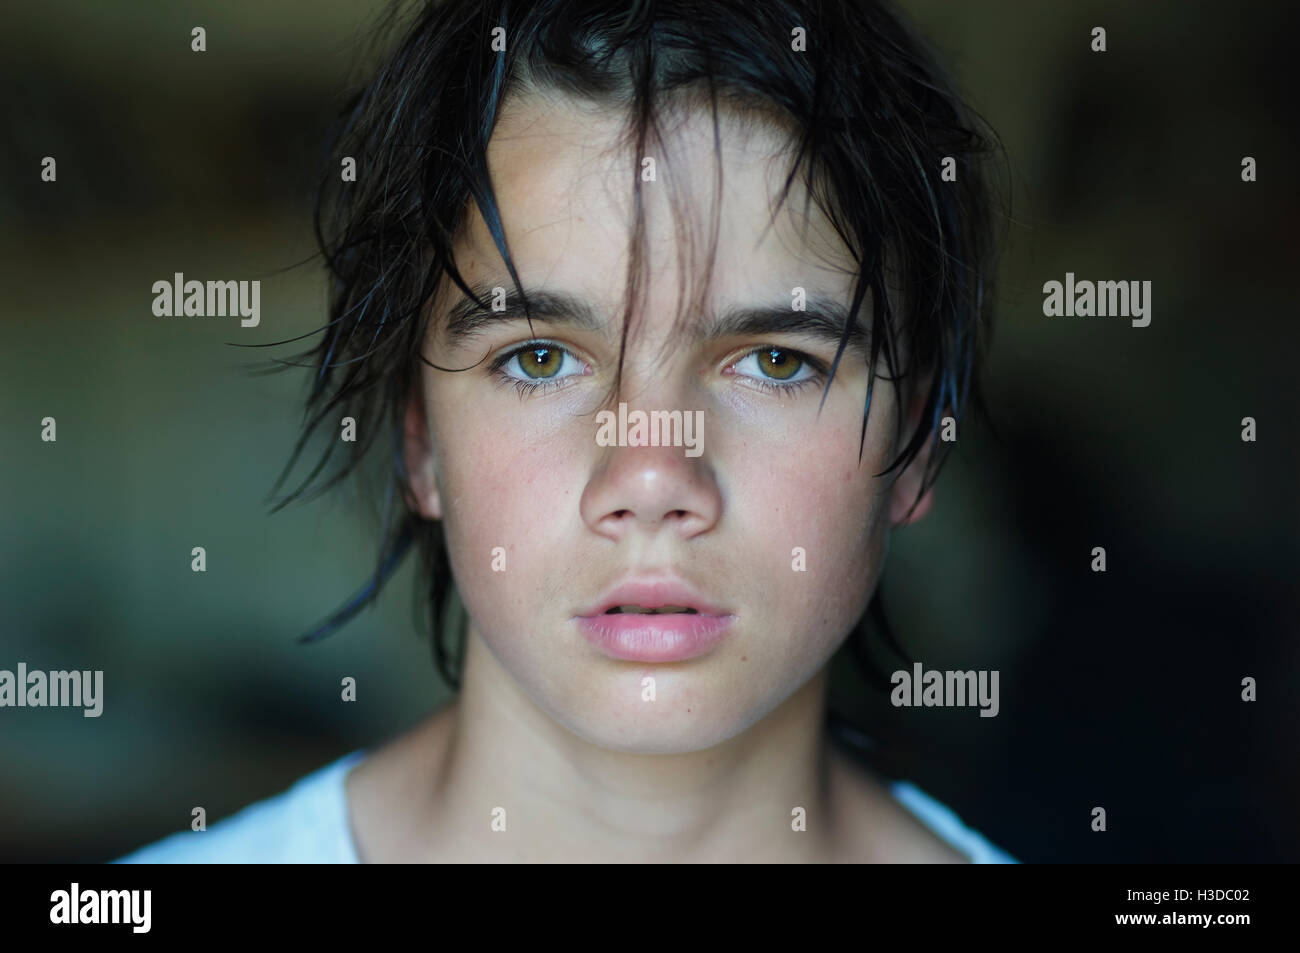 Portrait of a boy with brown hair and eyes, looking at camera. Stock Photo